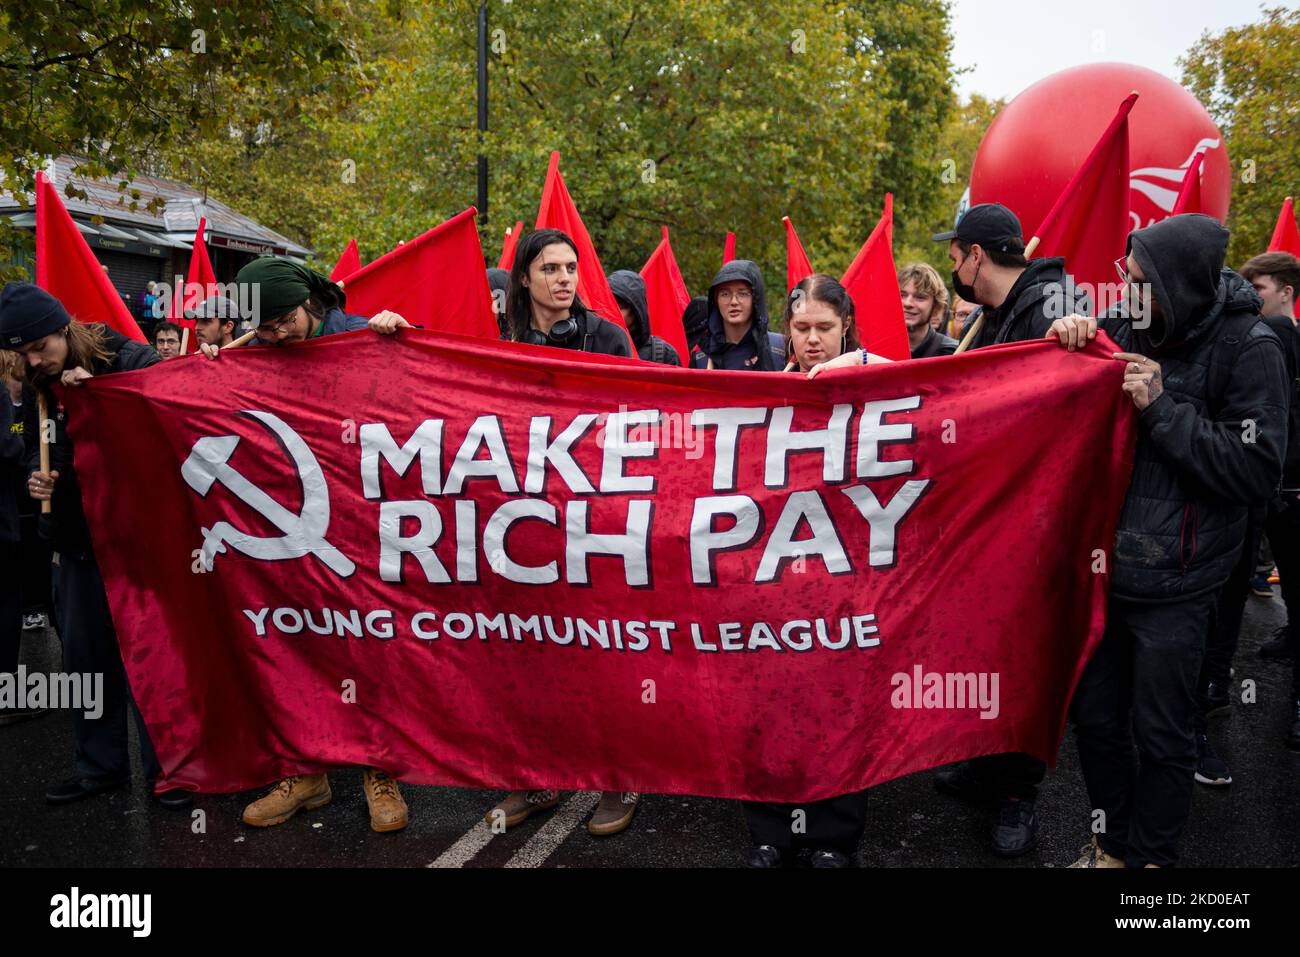 Westminster, London, UK. 5th Nov, 2022. Protesters are demonstrating in London asking for a general election to take place in the UK following the repeated change of Conservative party leadership and therefore Prime Ministers. They regard the Prime Minister as being unelected. Other themes include the cost of living crisis, low wages, fuel poverty and nationalisation. Young Communist League banner Stock Photo